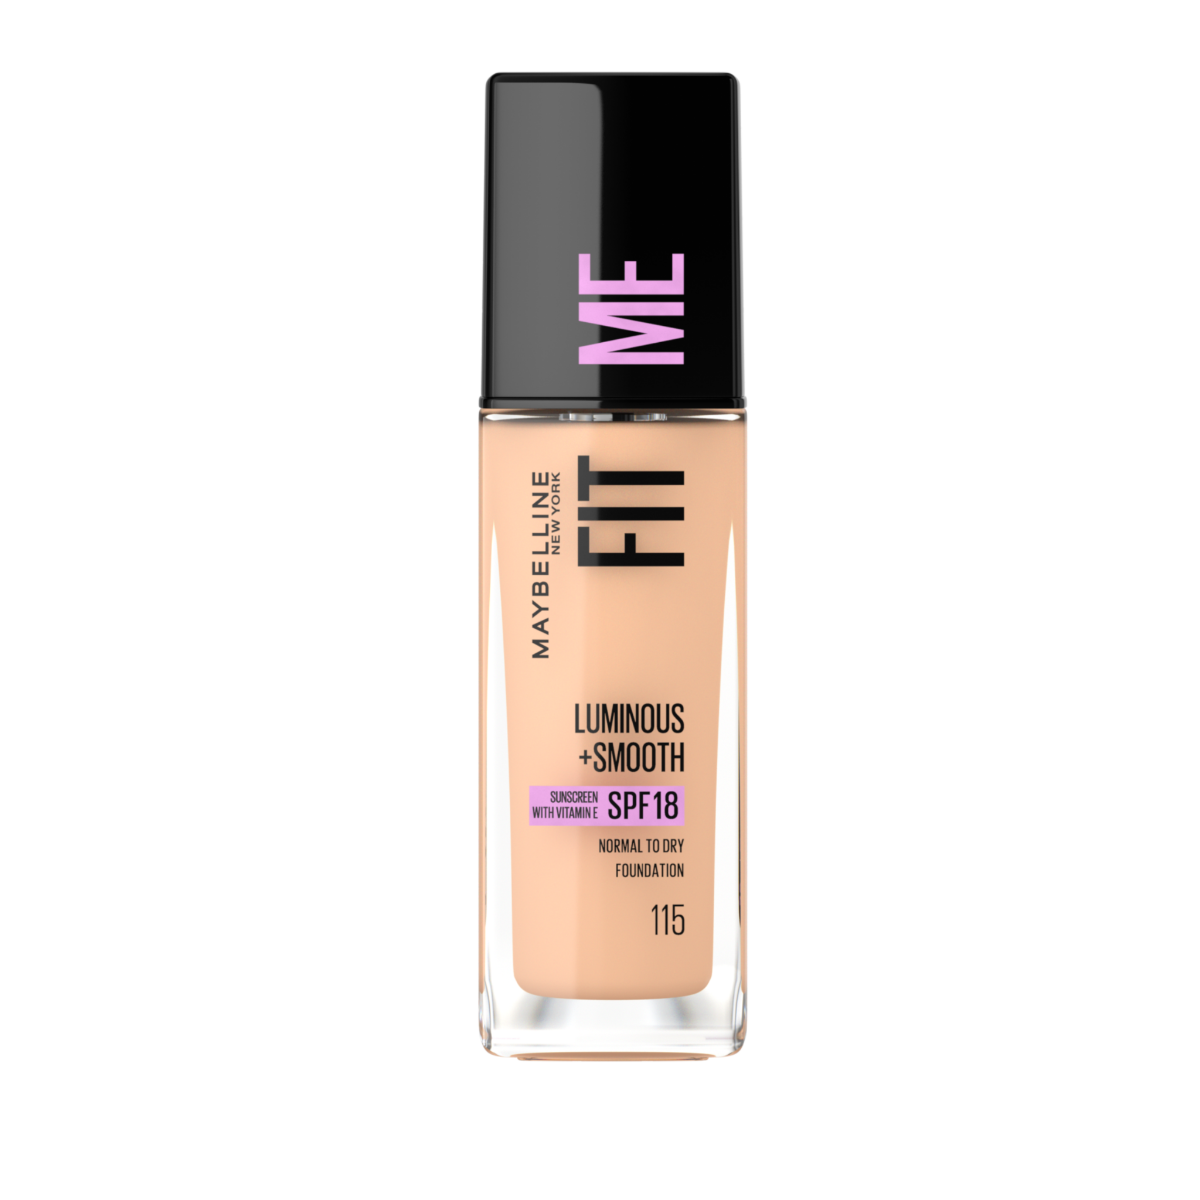 Maybelline Fit me Luminous + Smooth odstín 115 Ivory make-up 30 ml Maybelline